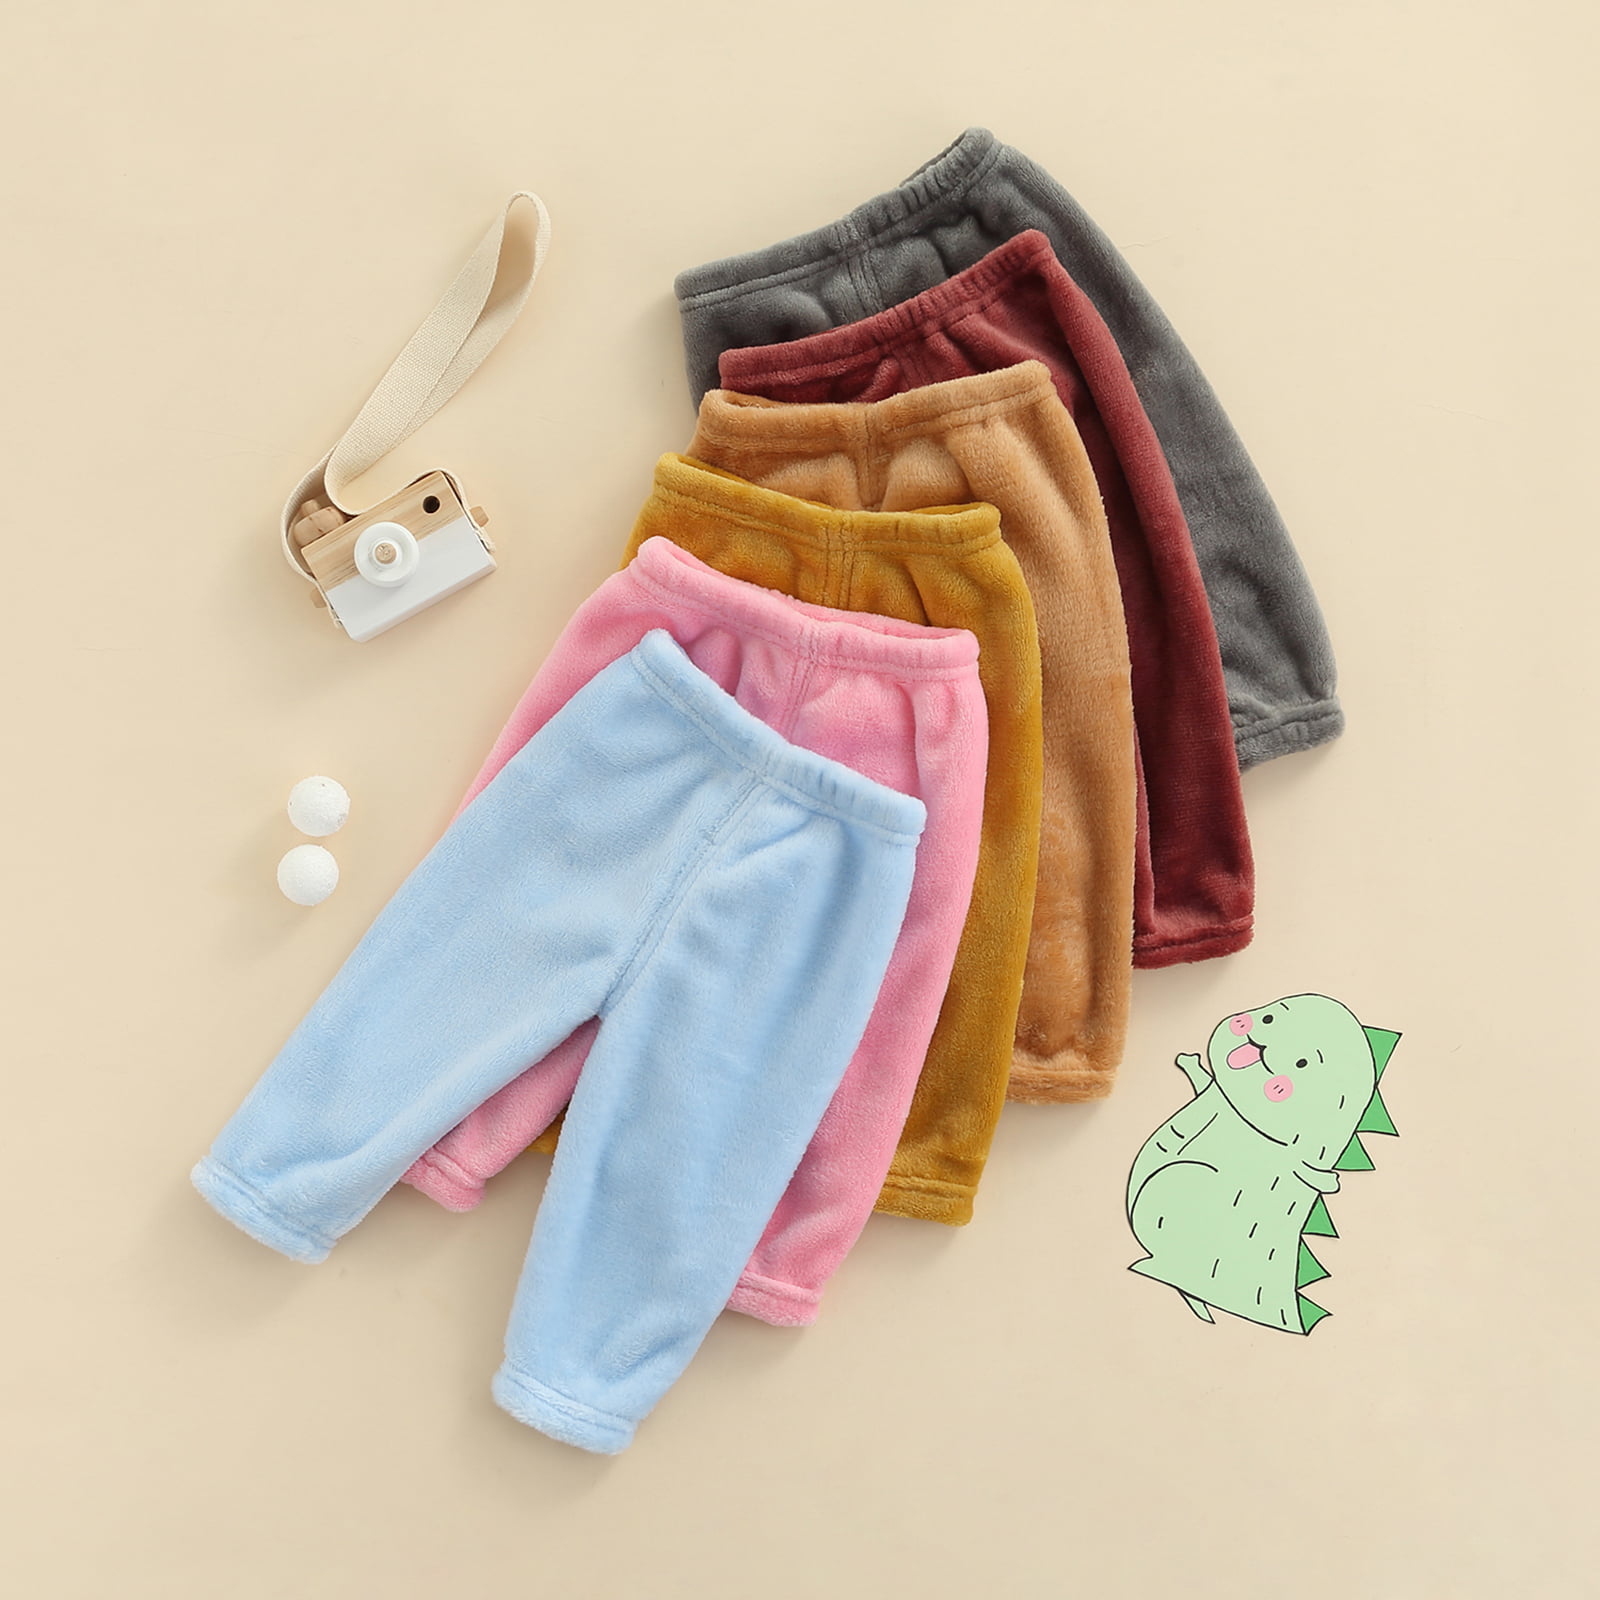 Babycharm Pants - Taille 6 - +16kg - 72 changes